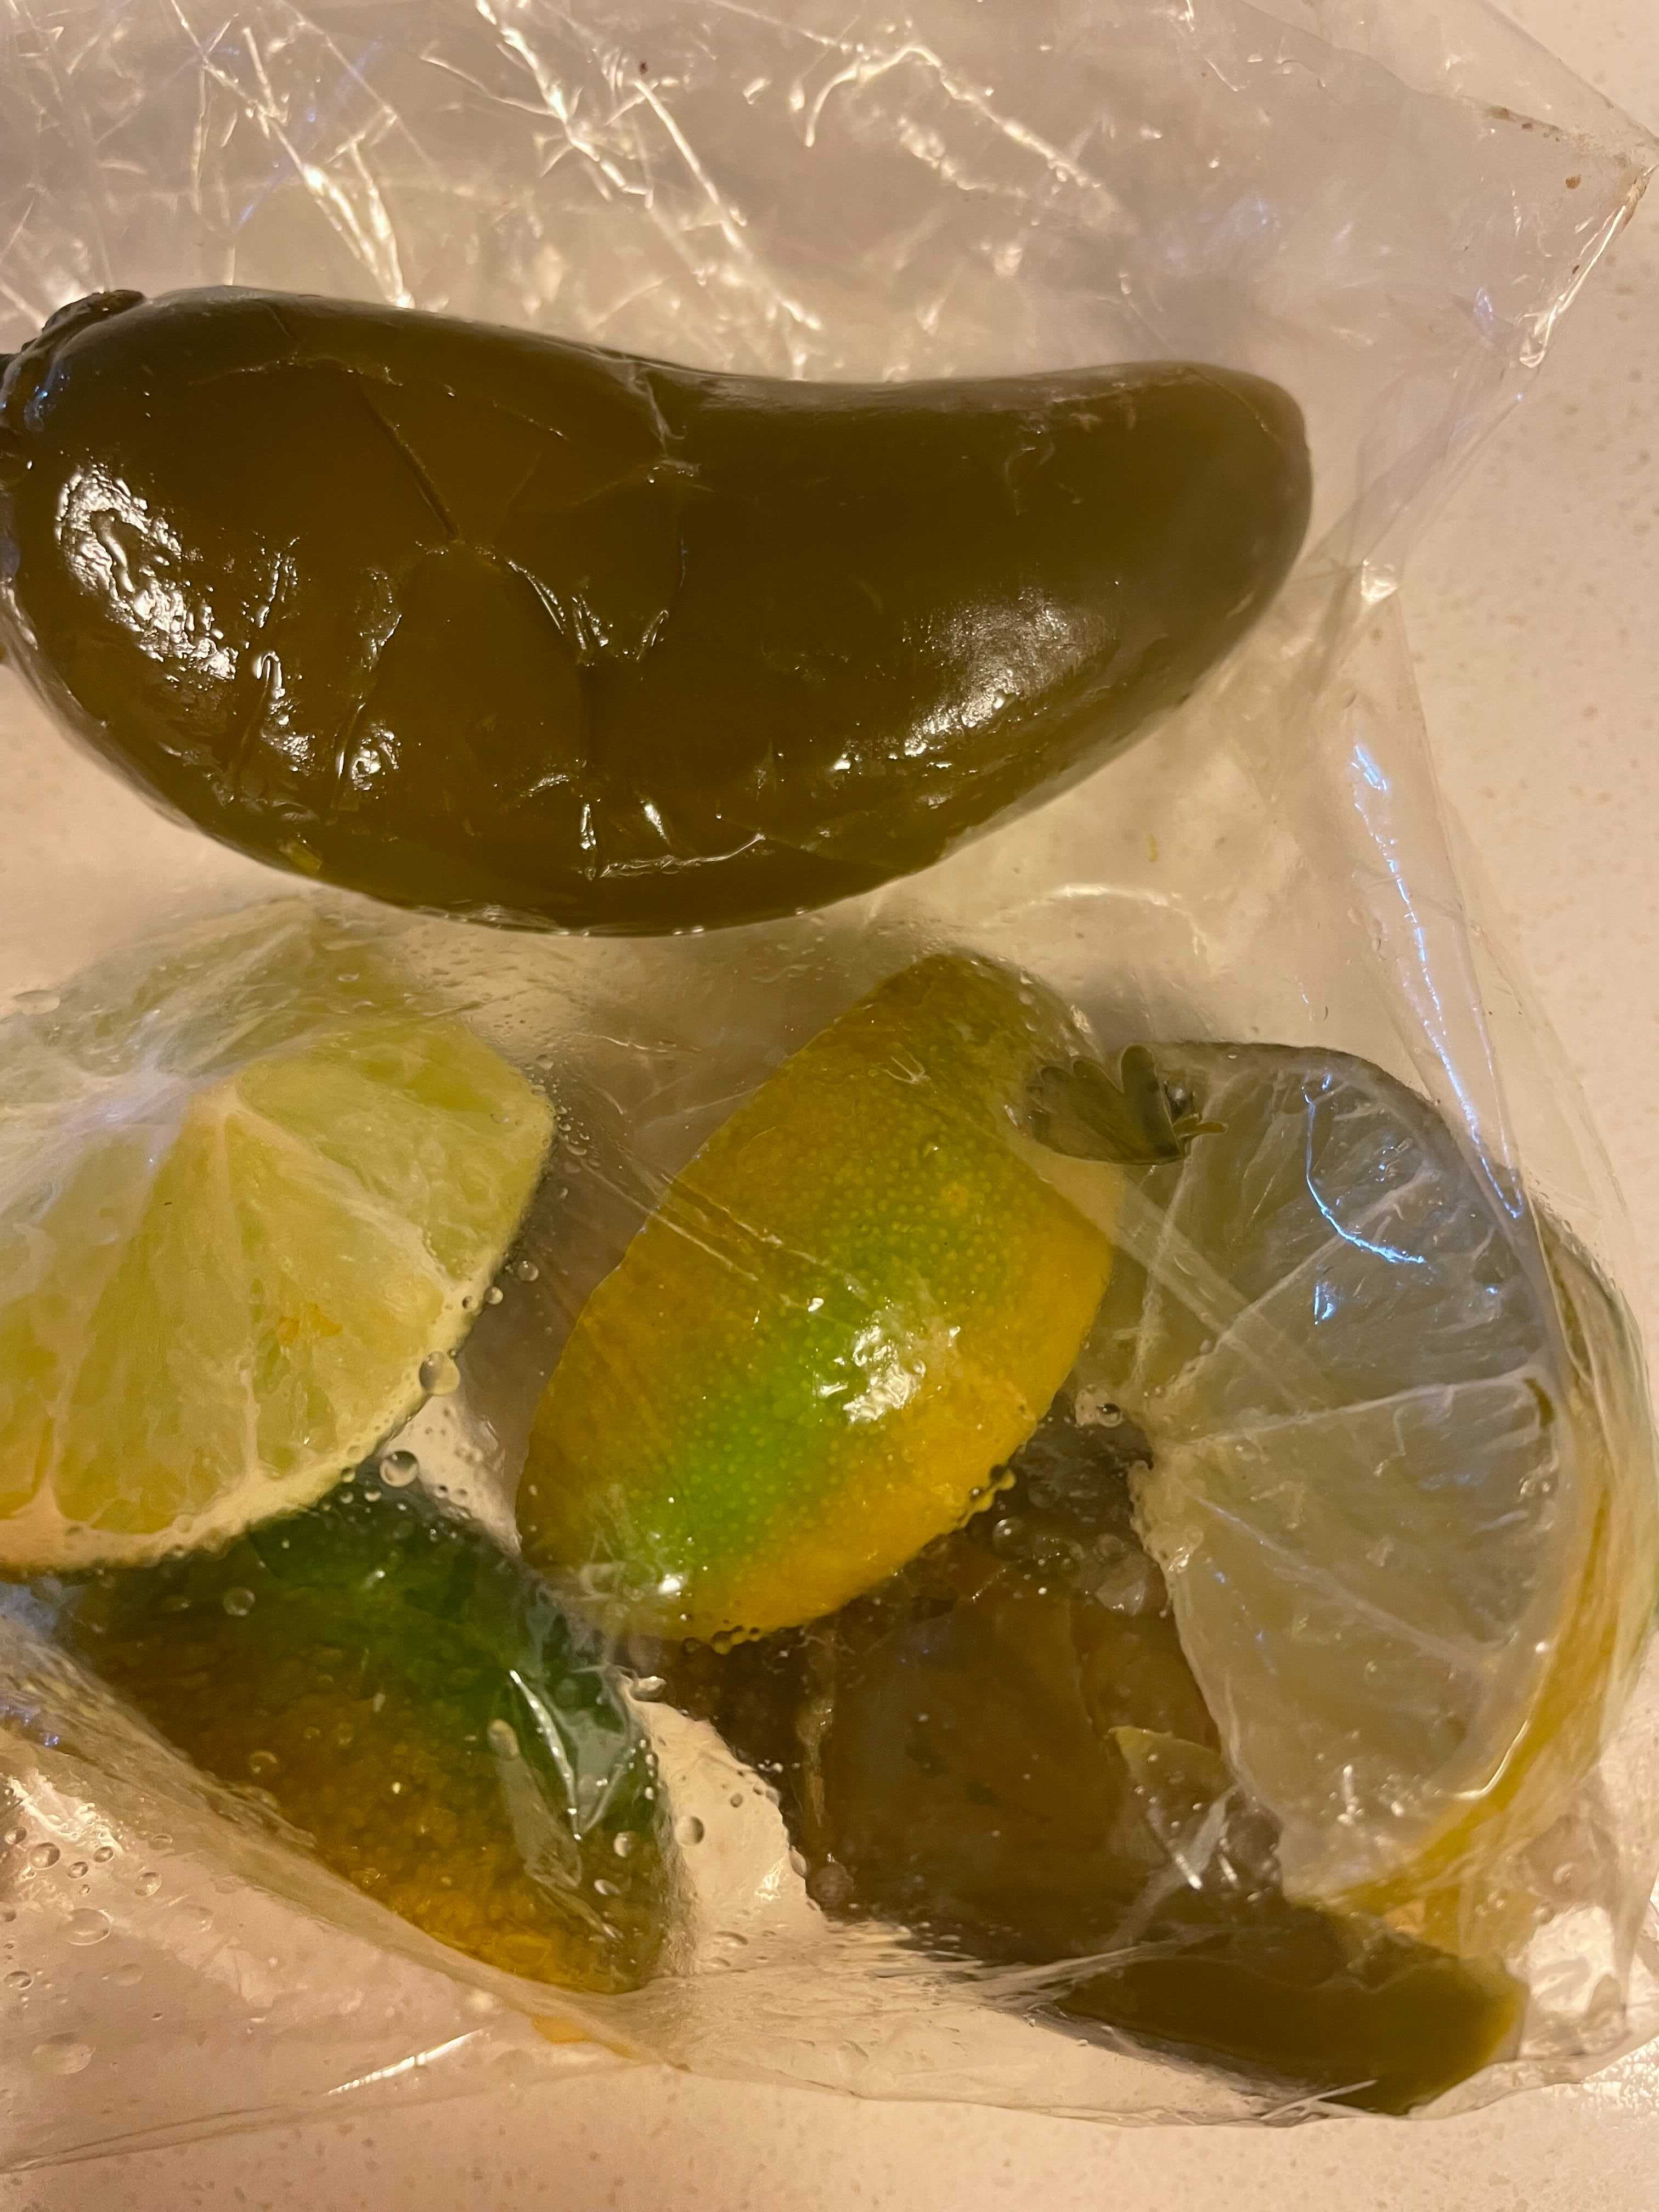 jalapenos and limes